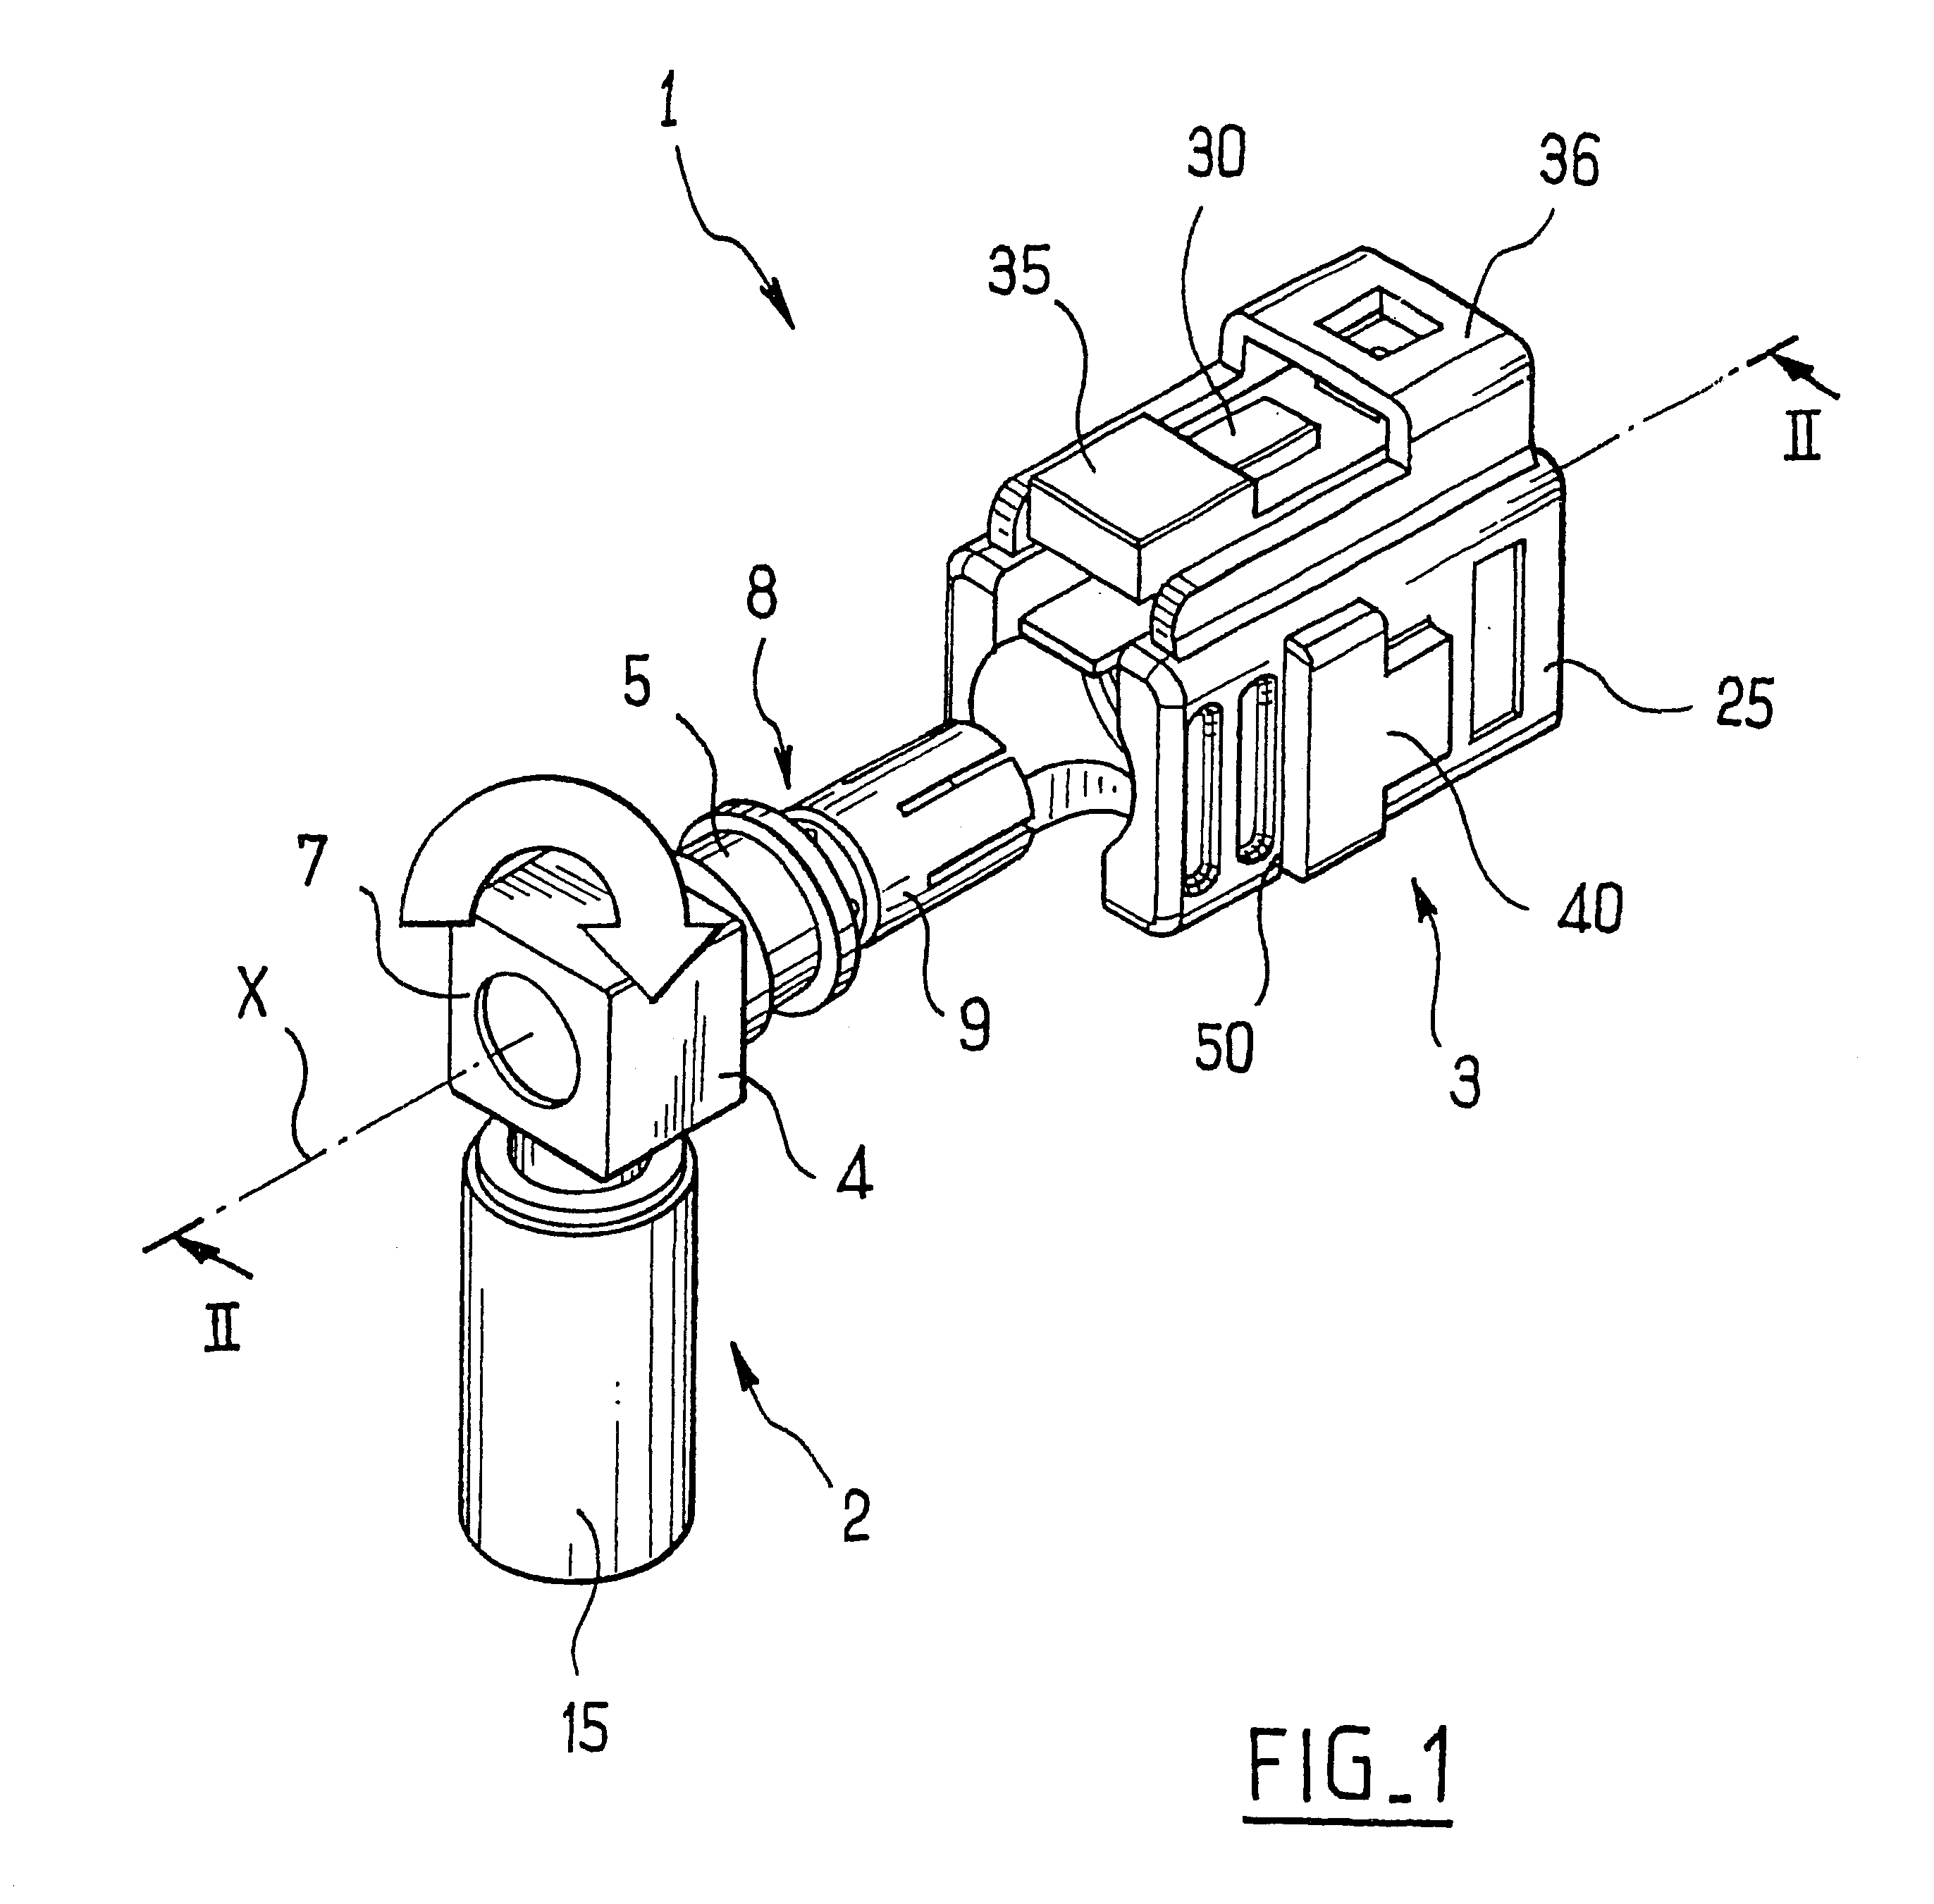 Angled coaxial electrical connector device